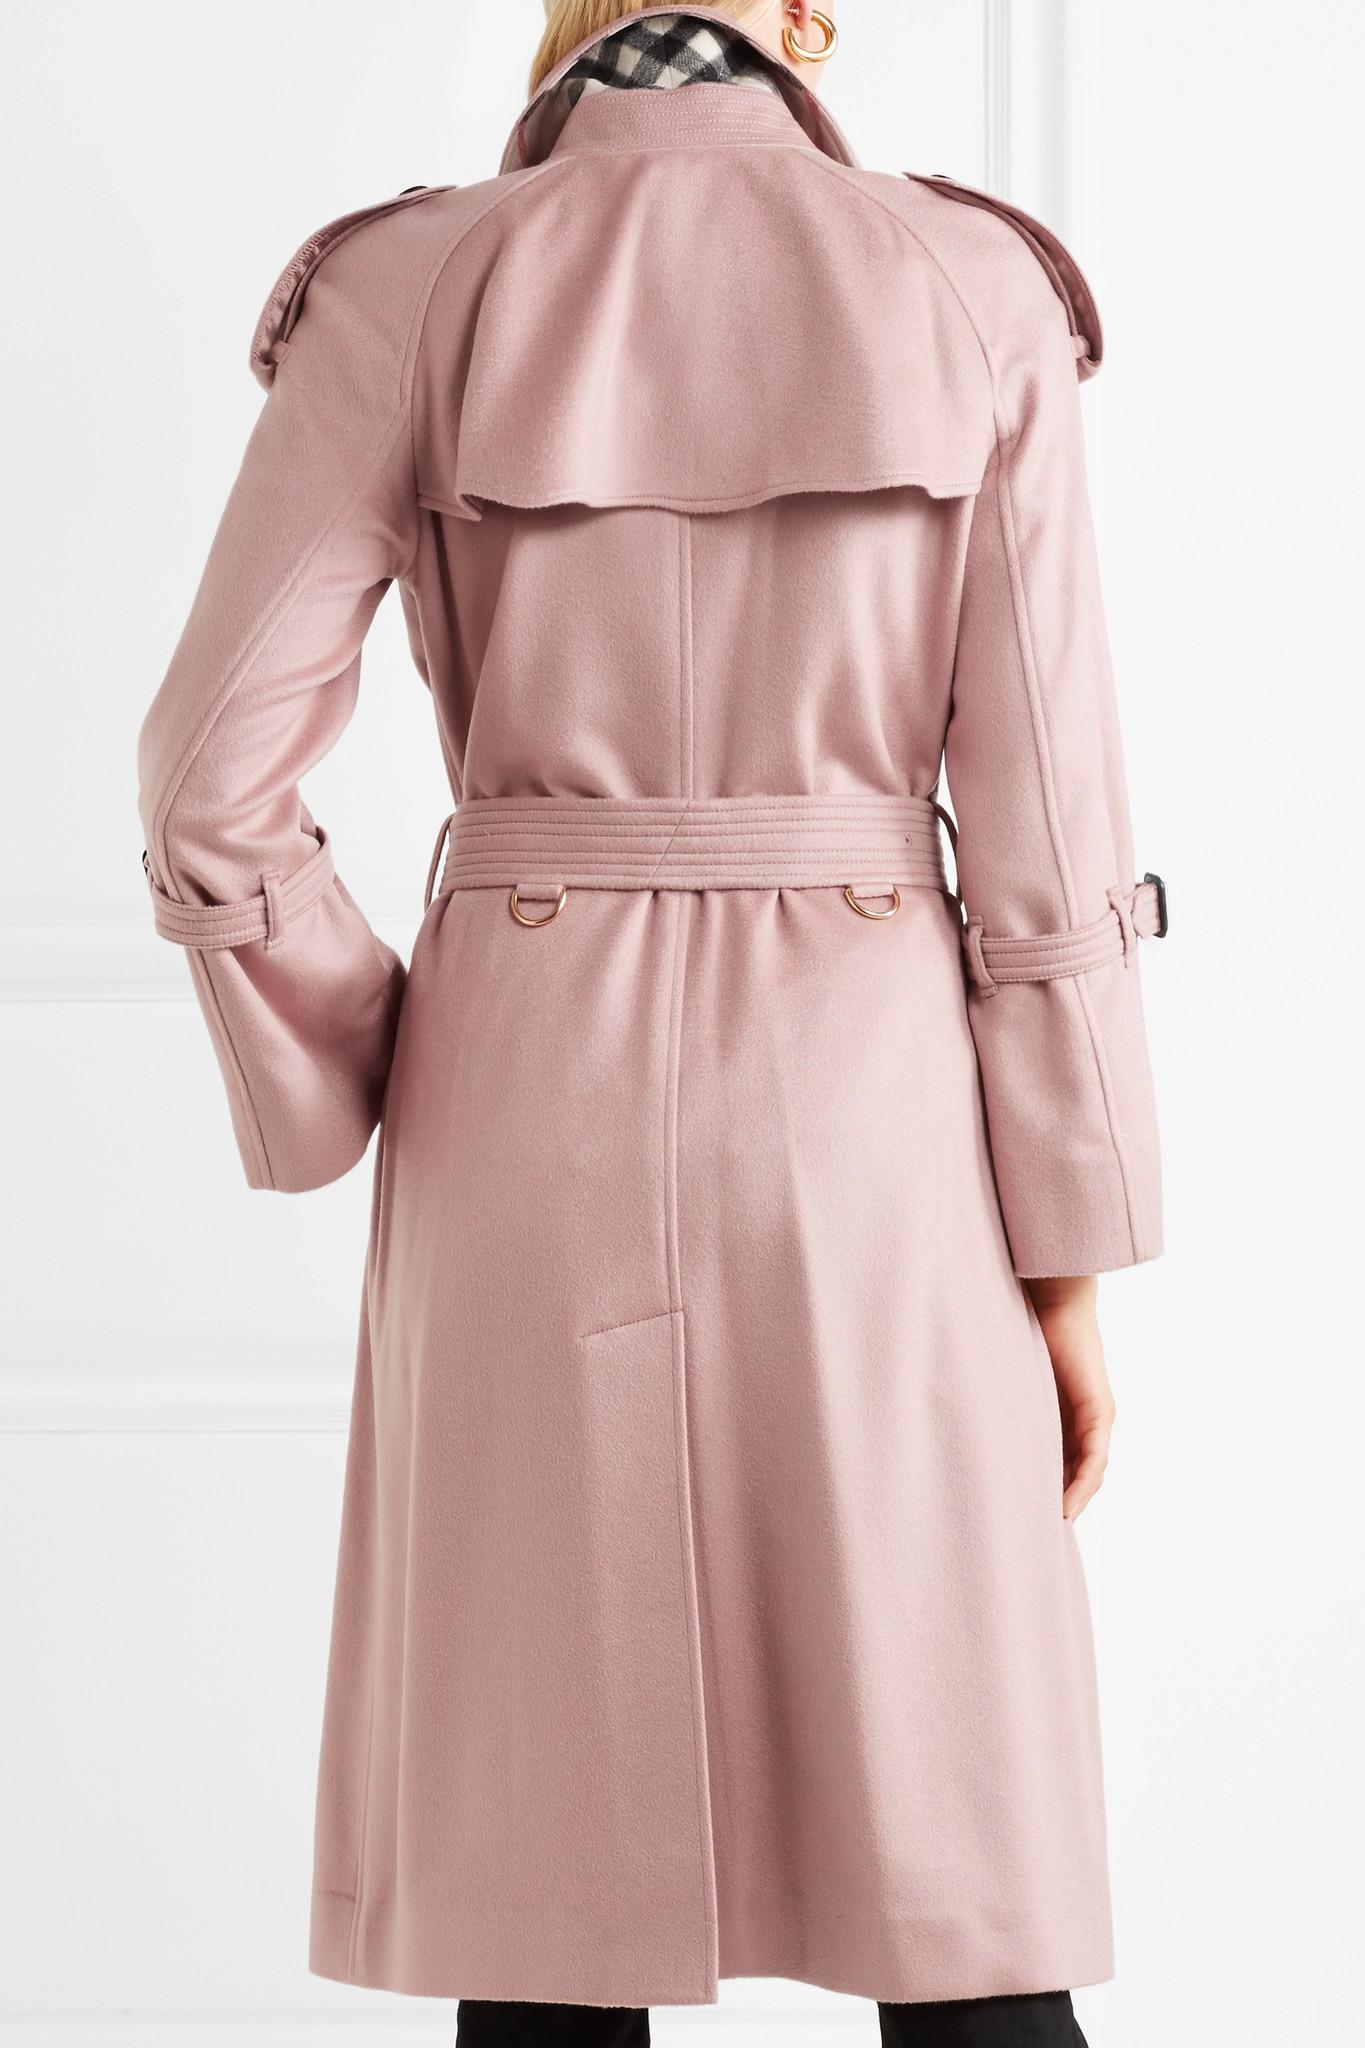 Burberry The Lakestone Cashmere Trench Coat in Pastel Pink (Pink) - Lyst